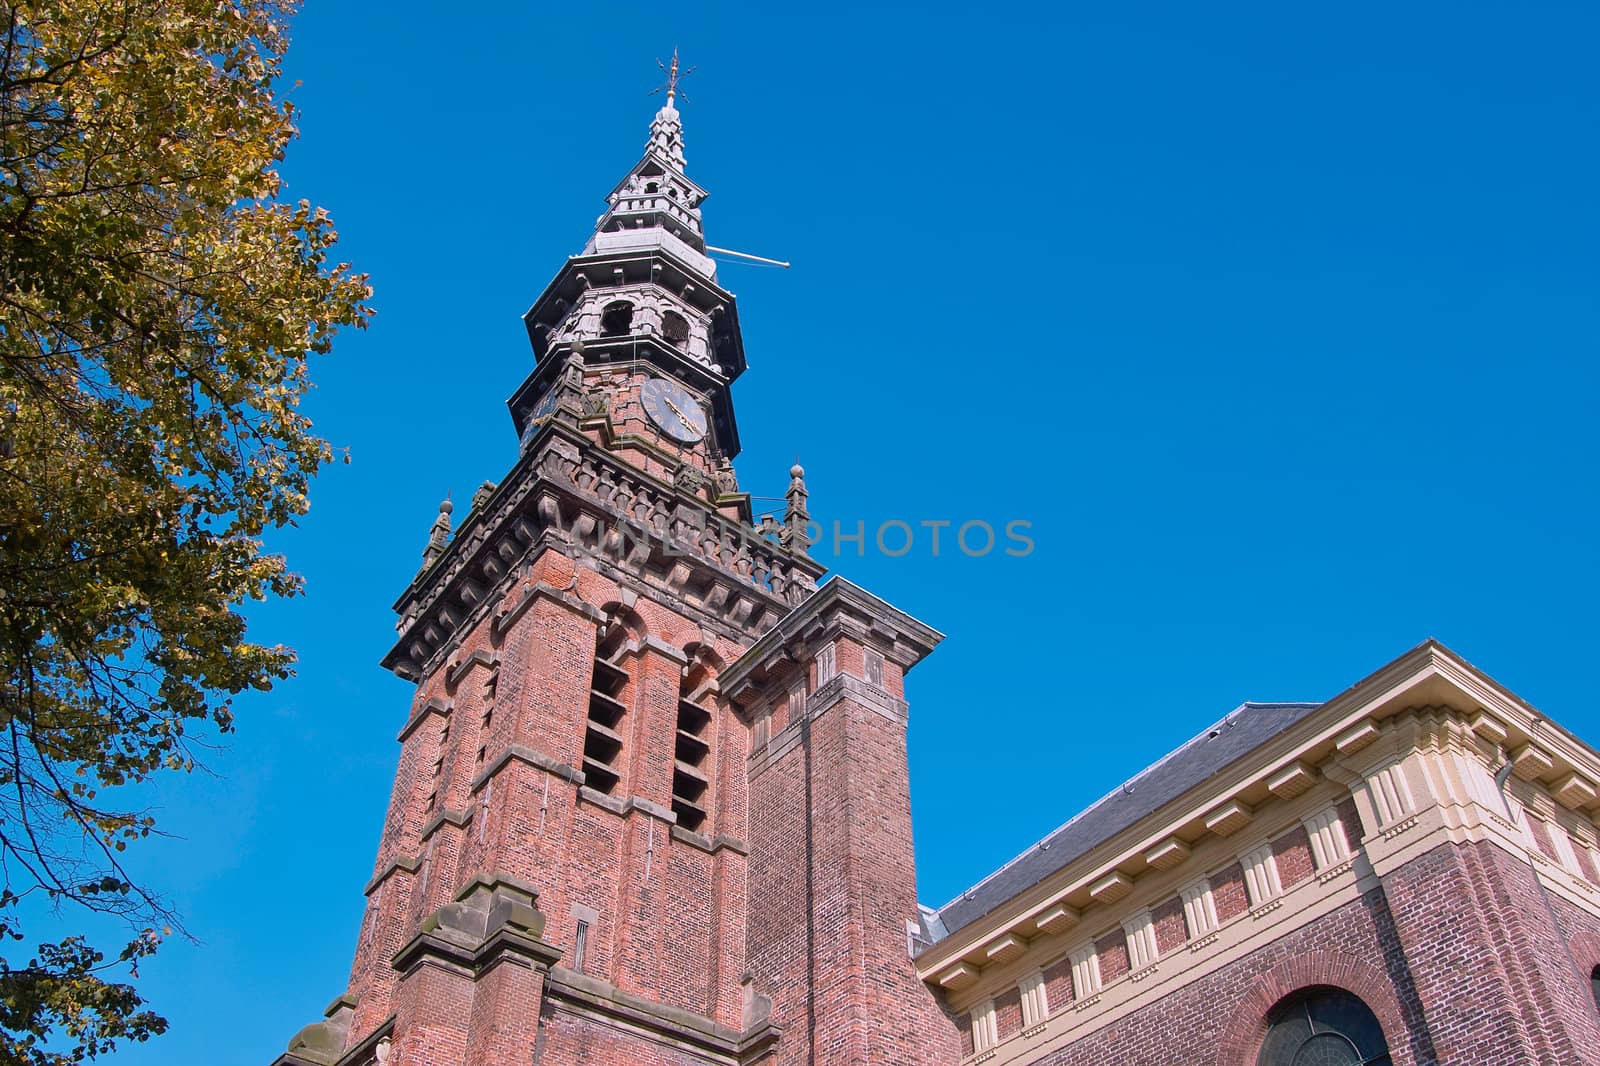 The New Church in Haarlem, though not so new anymore, is a nice example of the Renaissance style.